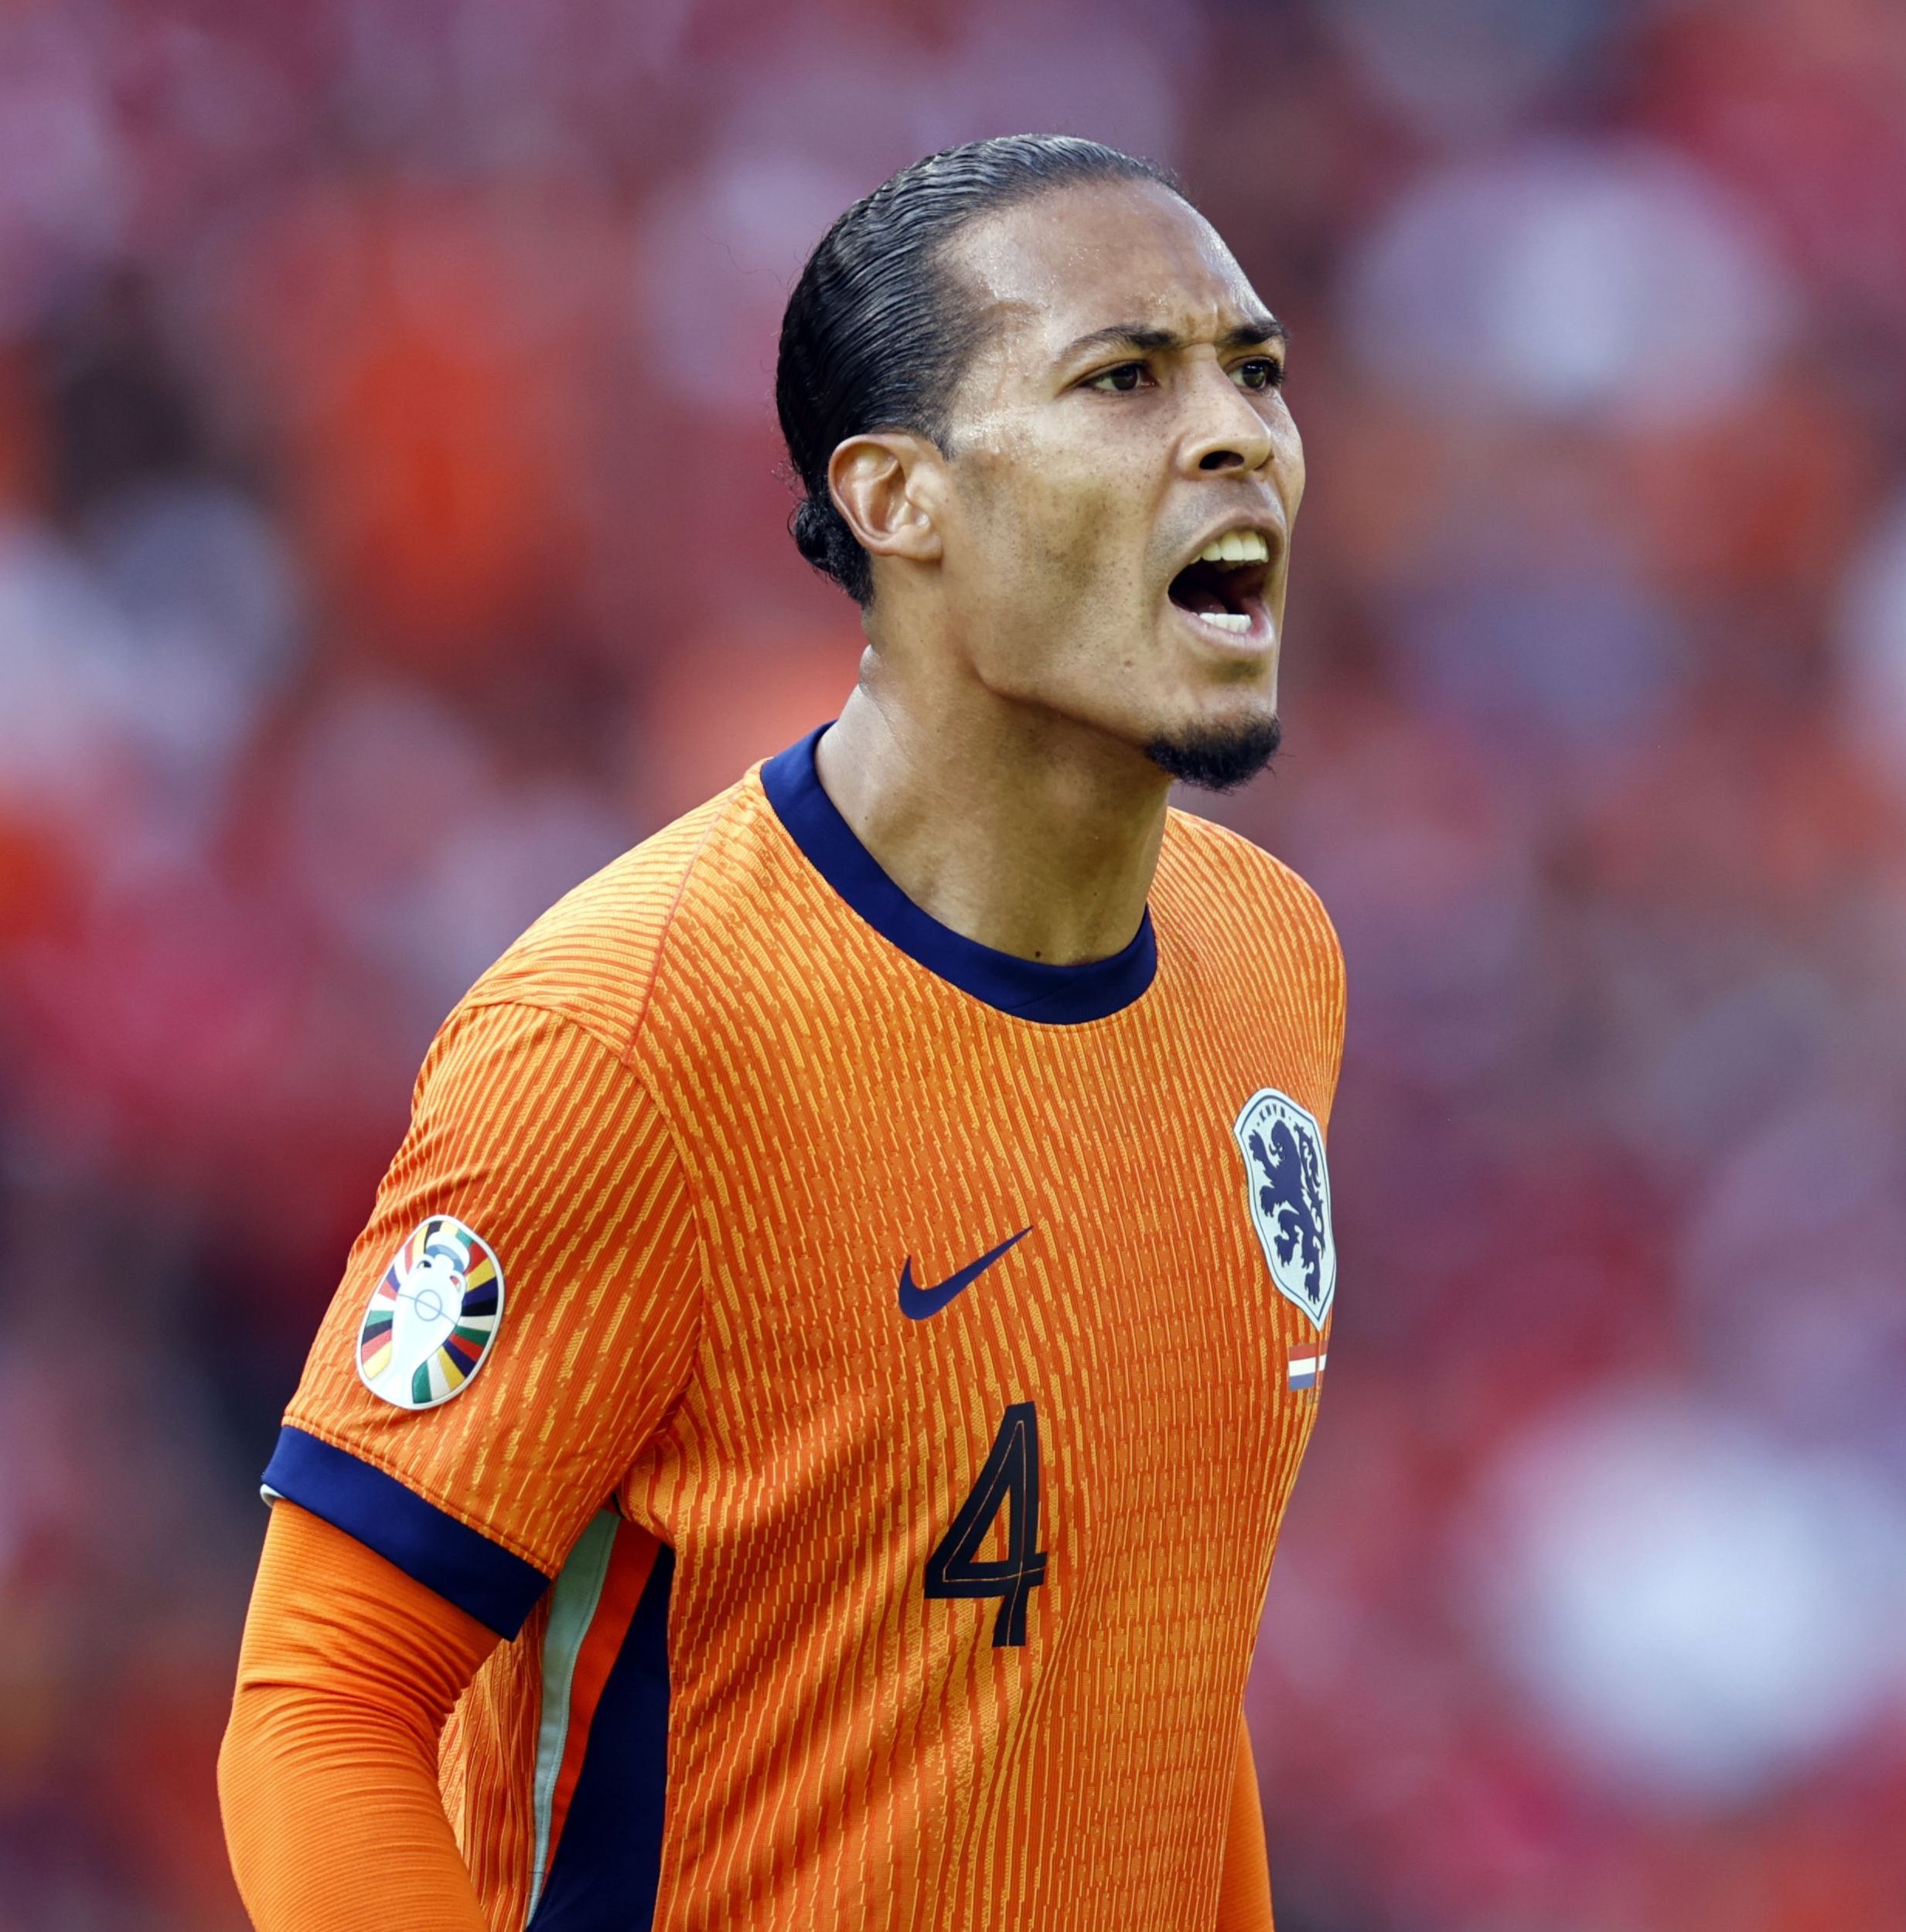 Van Dijk, the Liverpool and Holland captain, remains one of the best centre backs in the world